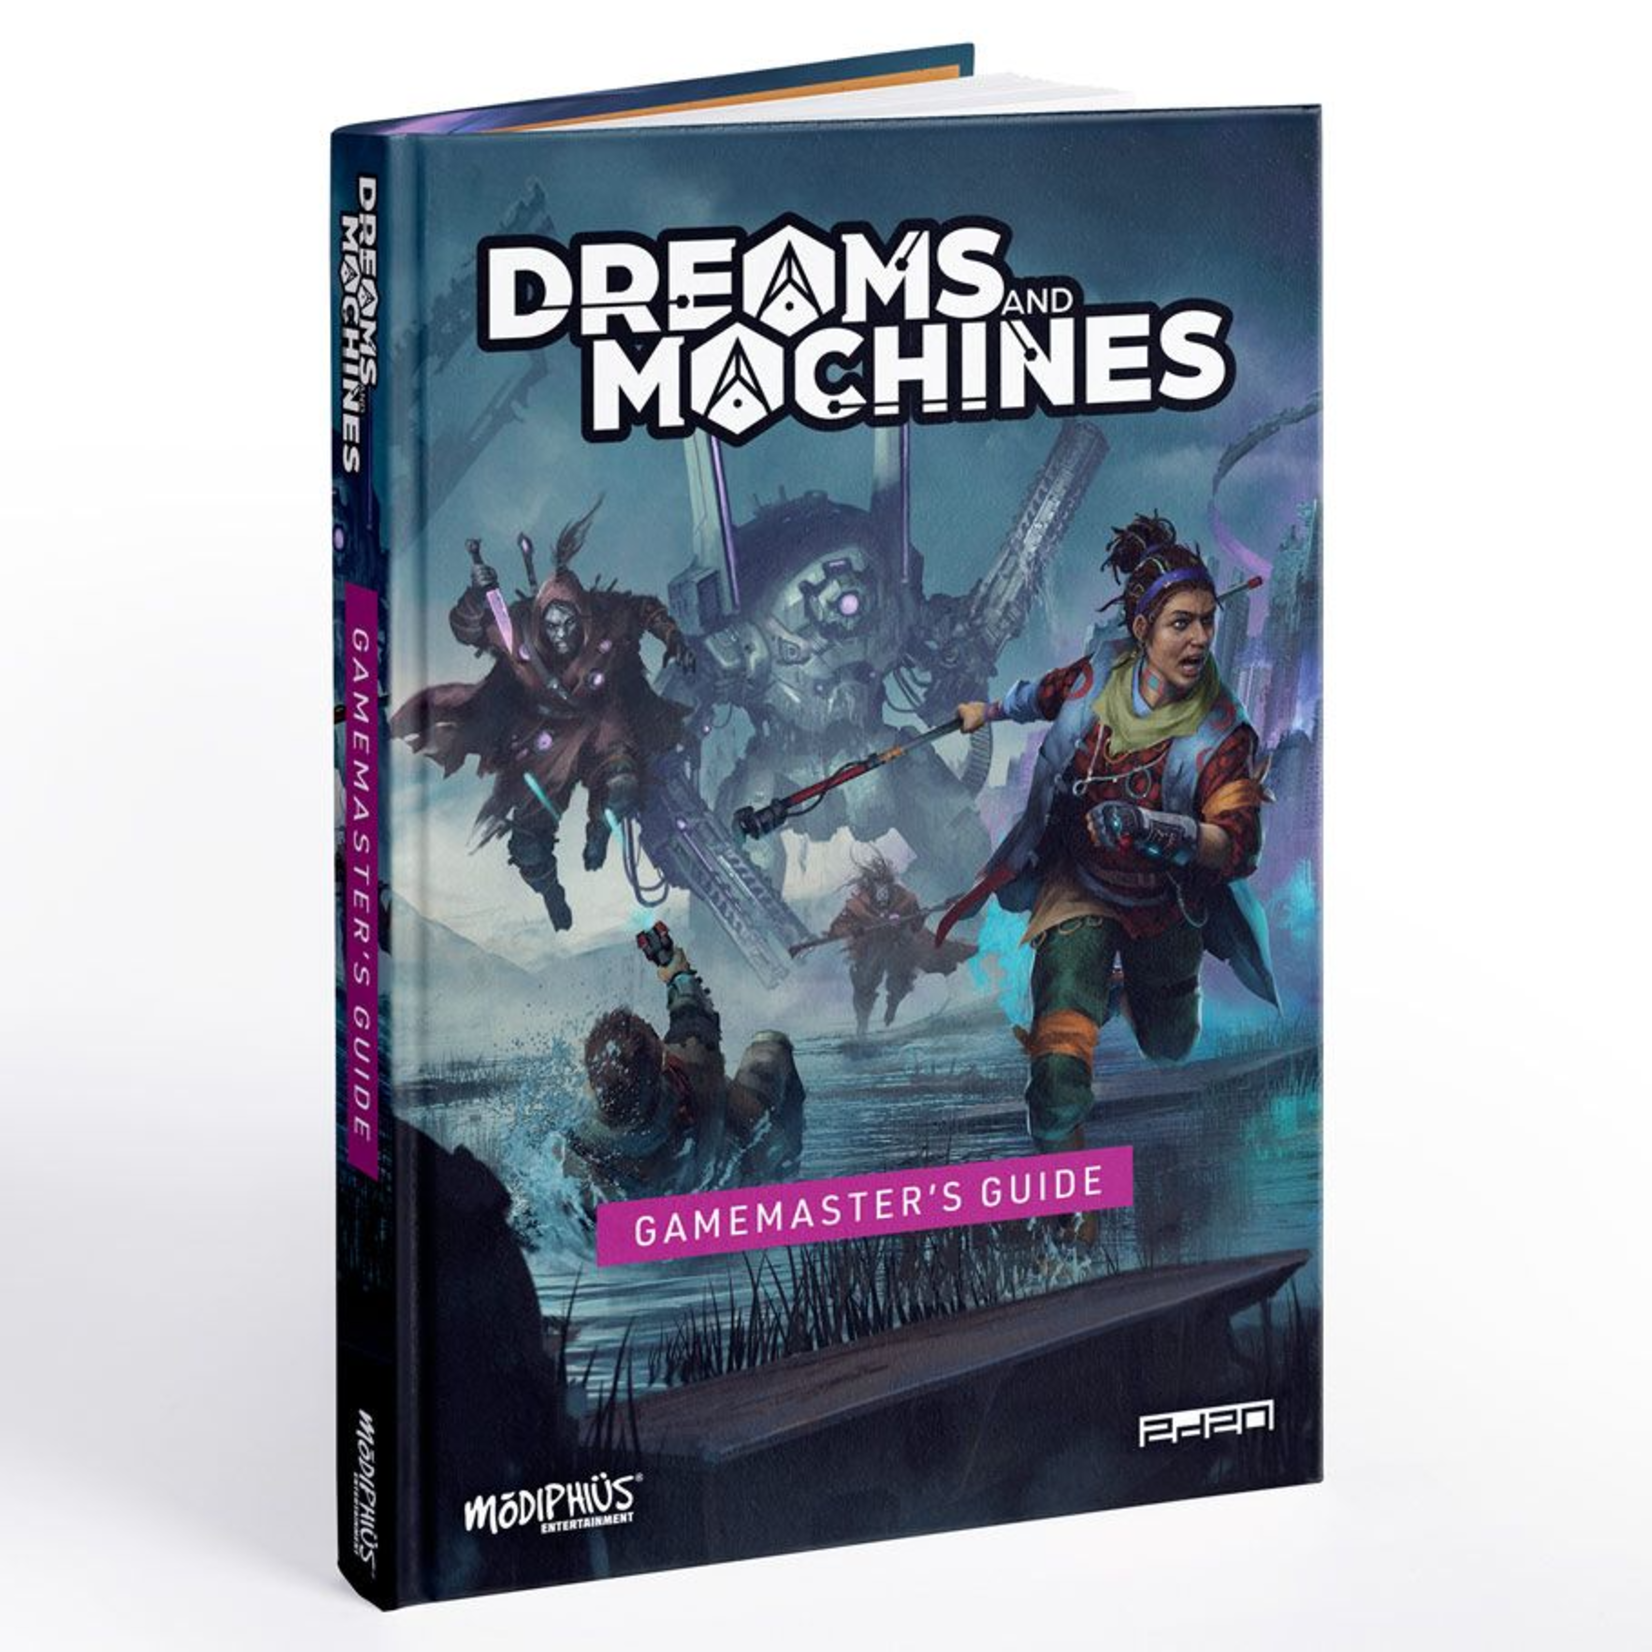 Modiphius Dreams and Machines Gamemaster's Guide